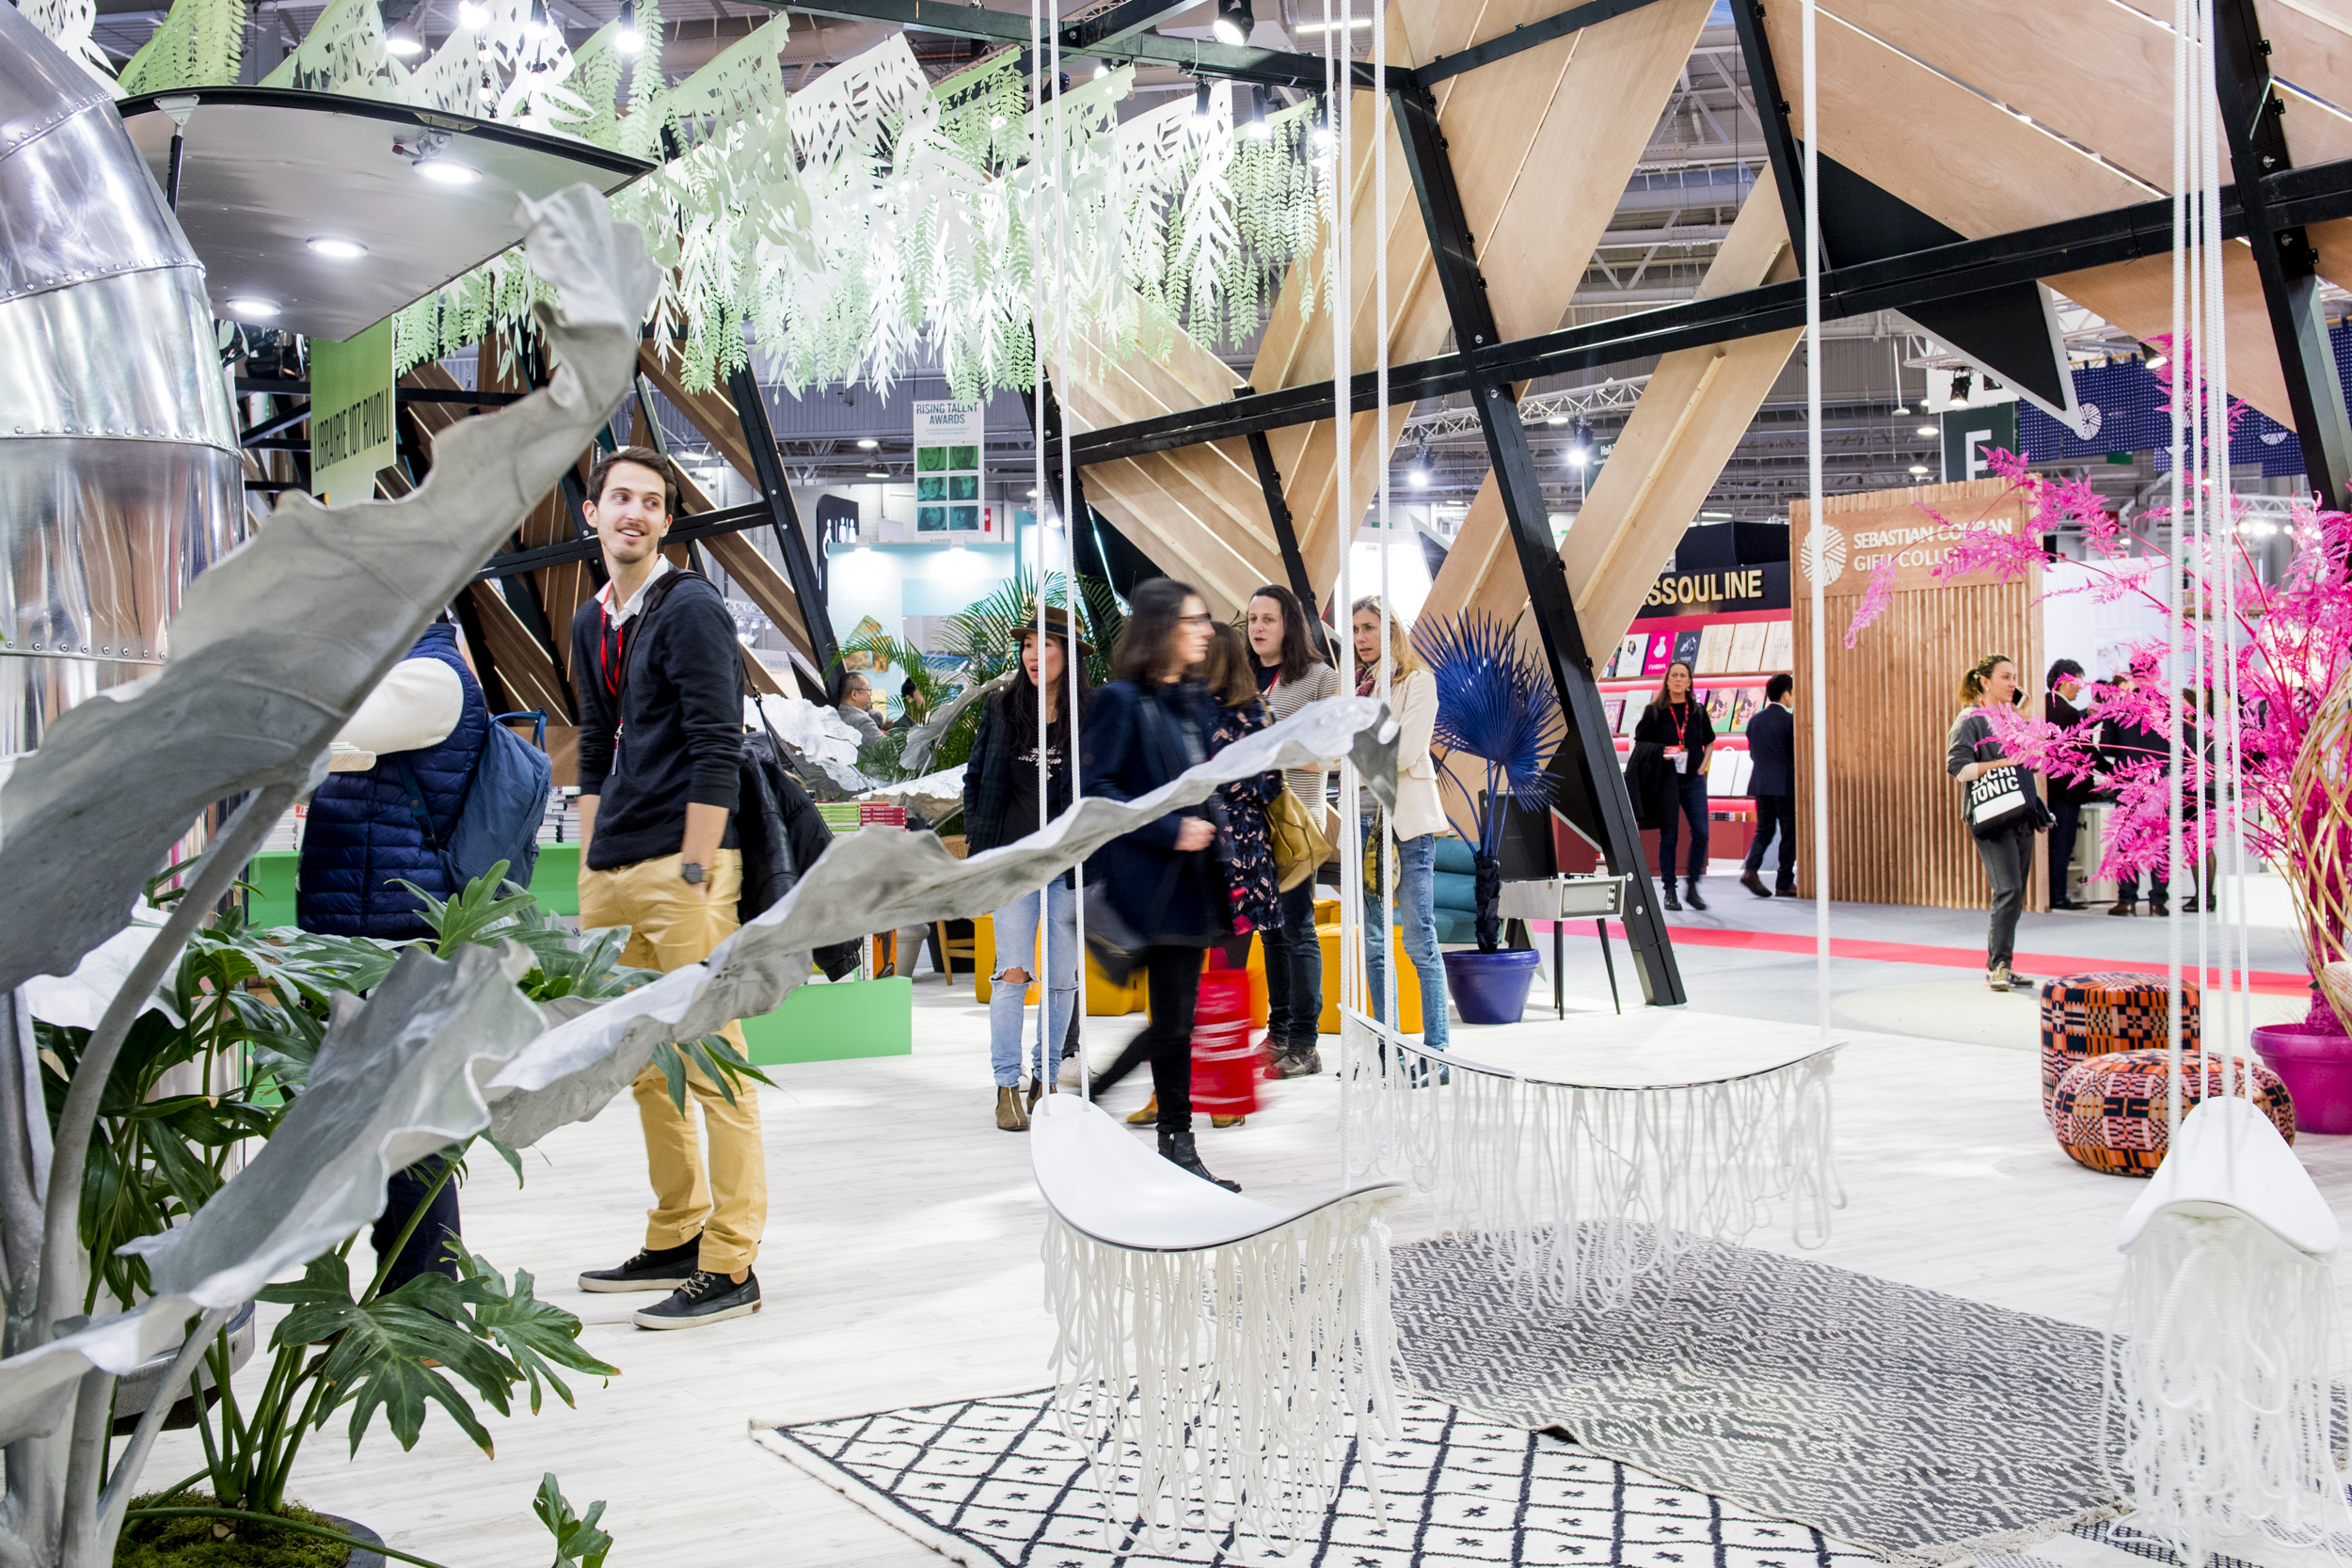 Maison&Objet Paris: What to expect from your visit